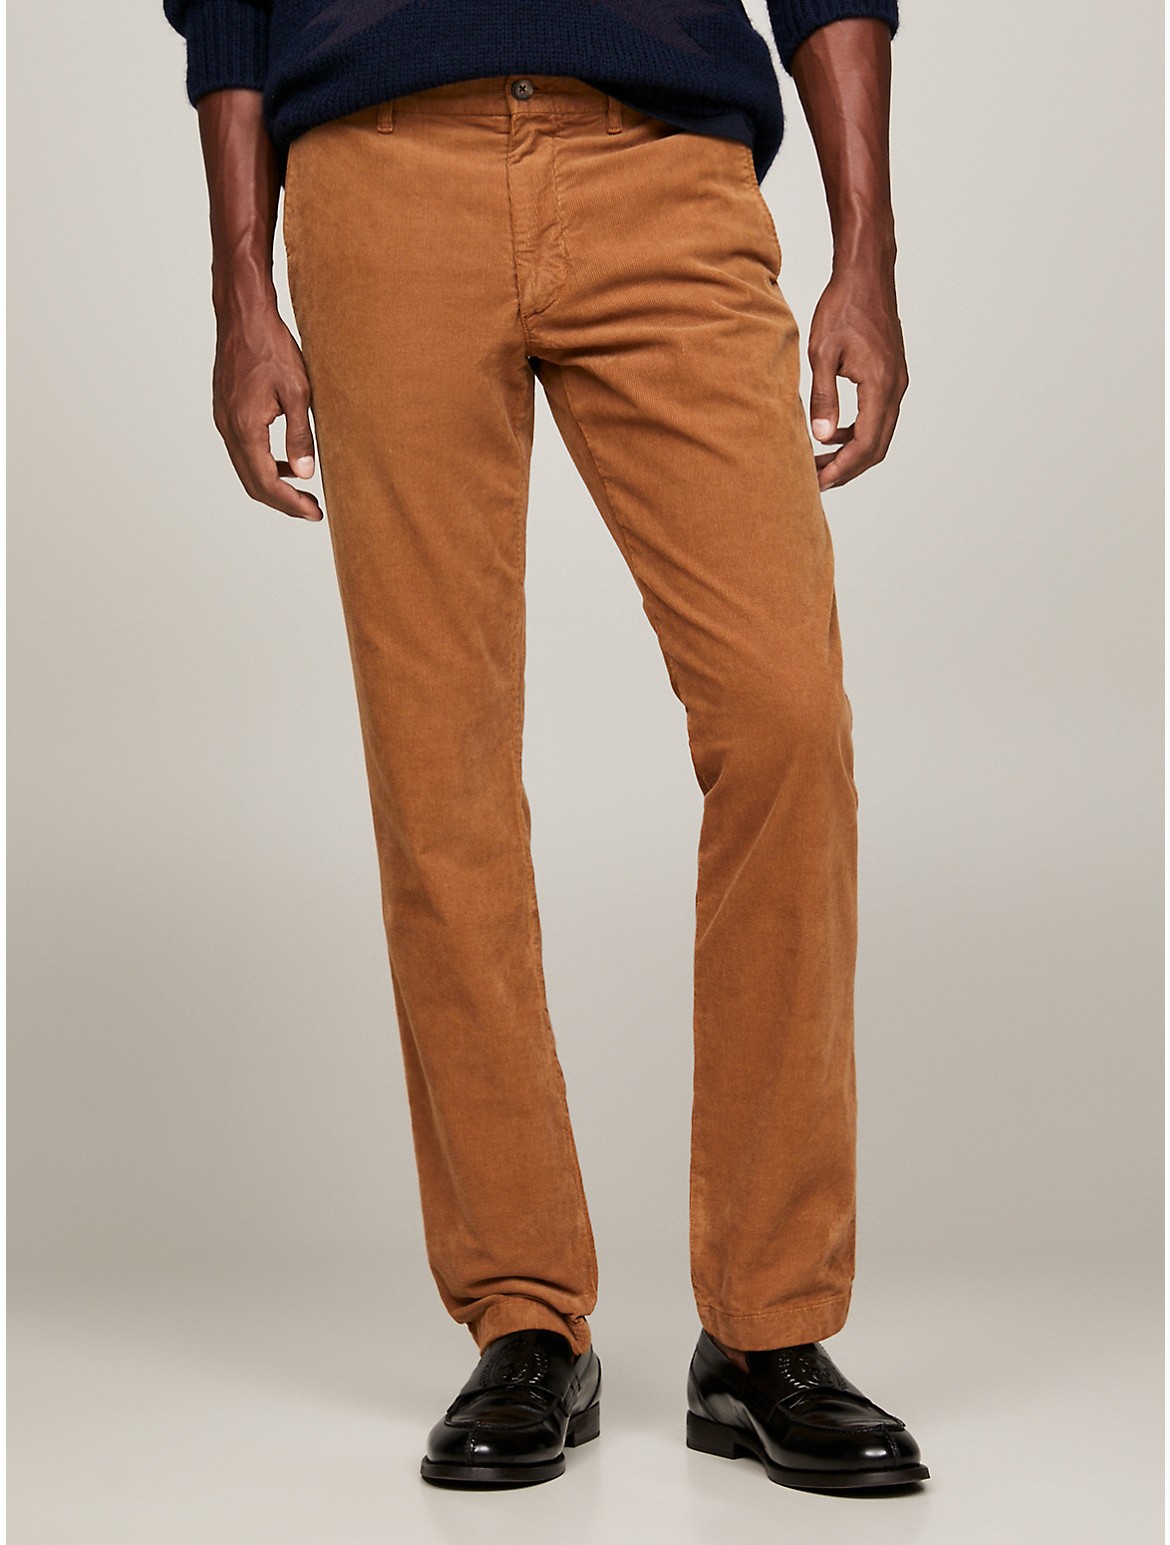 TOMMY HILFIGER STRAIGHT FIT CORDUROY CHINO